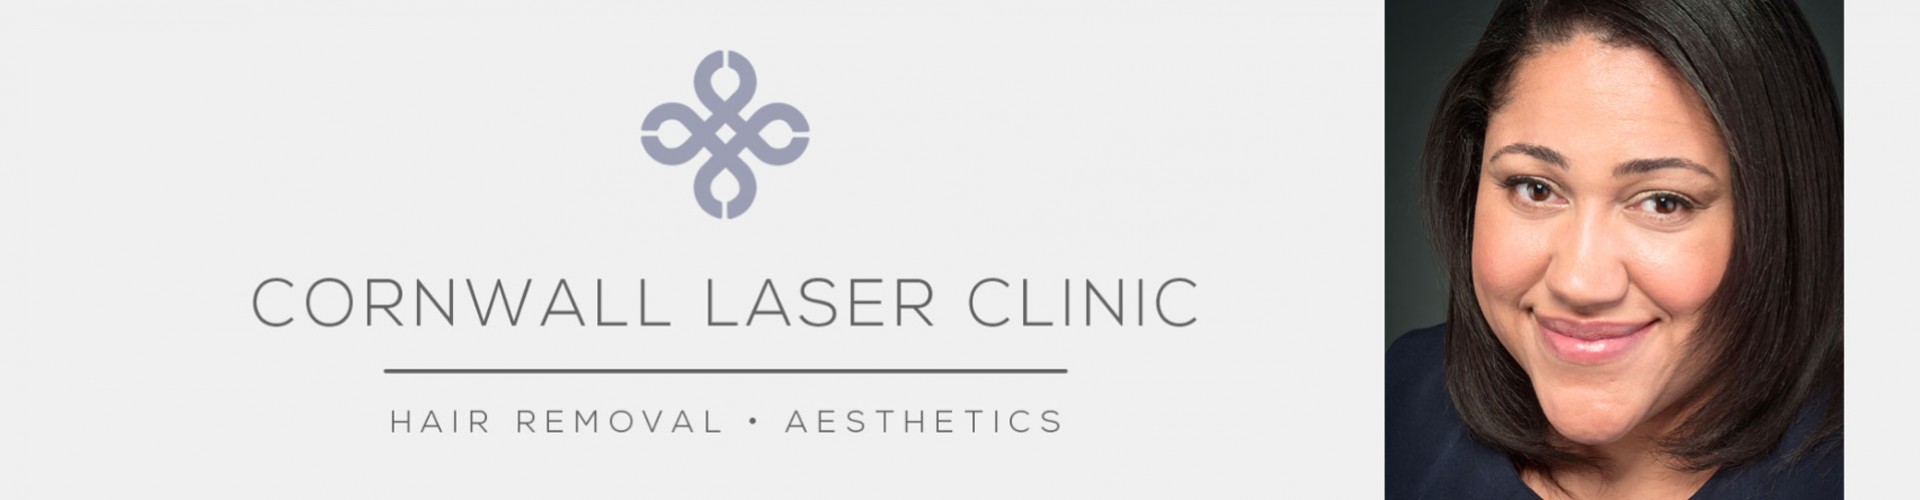 Laser Hair Removal  Cornwall Laser Clinic